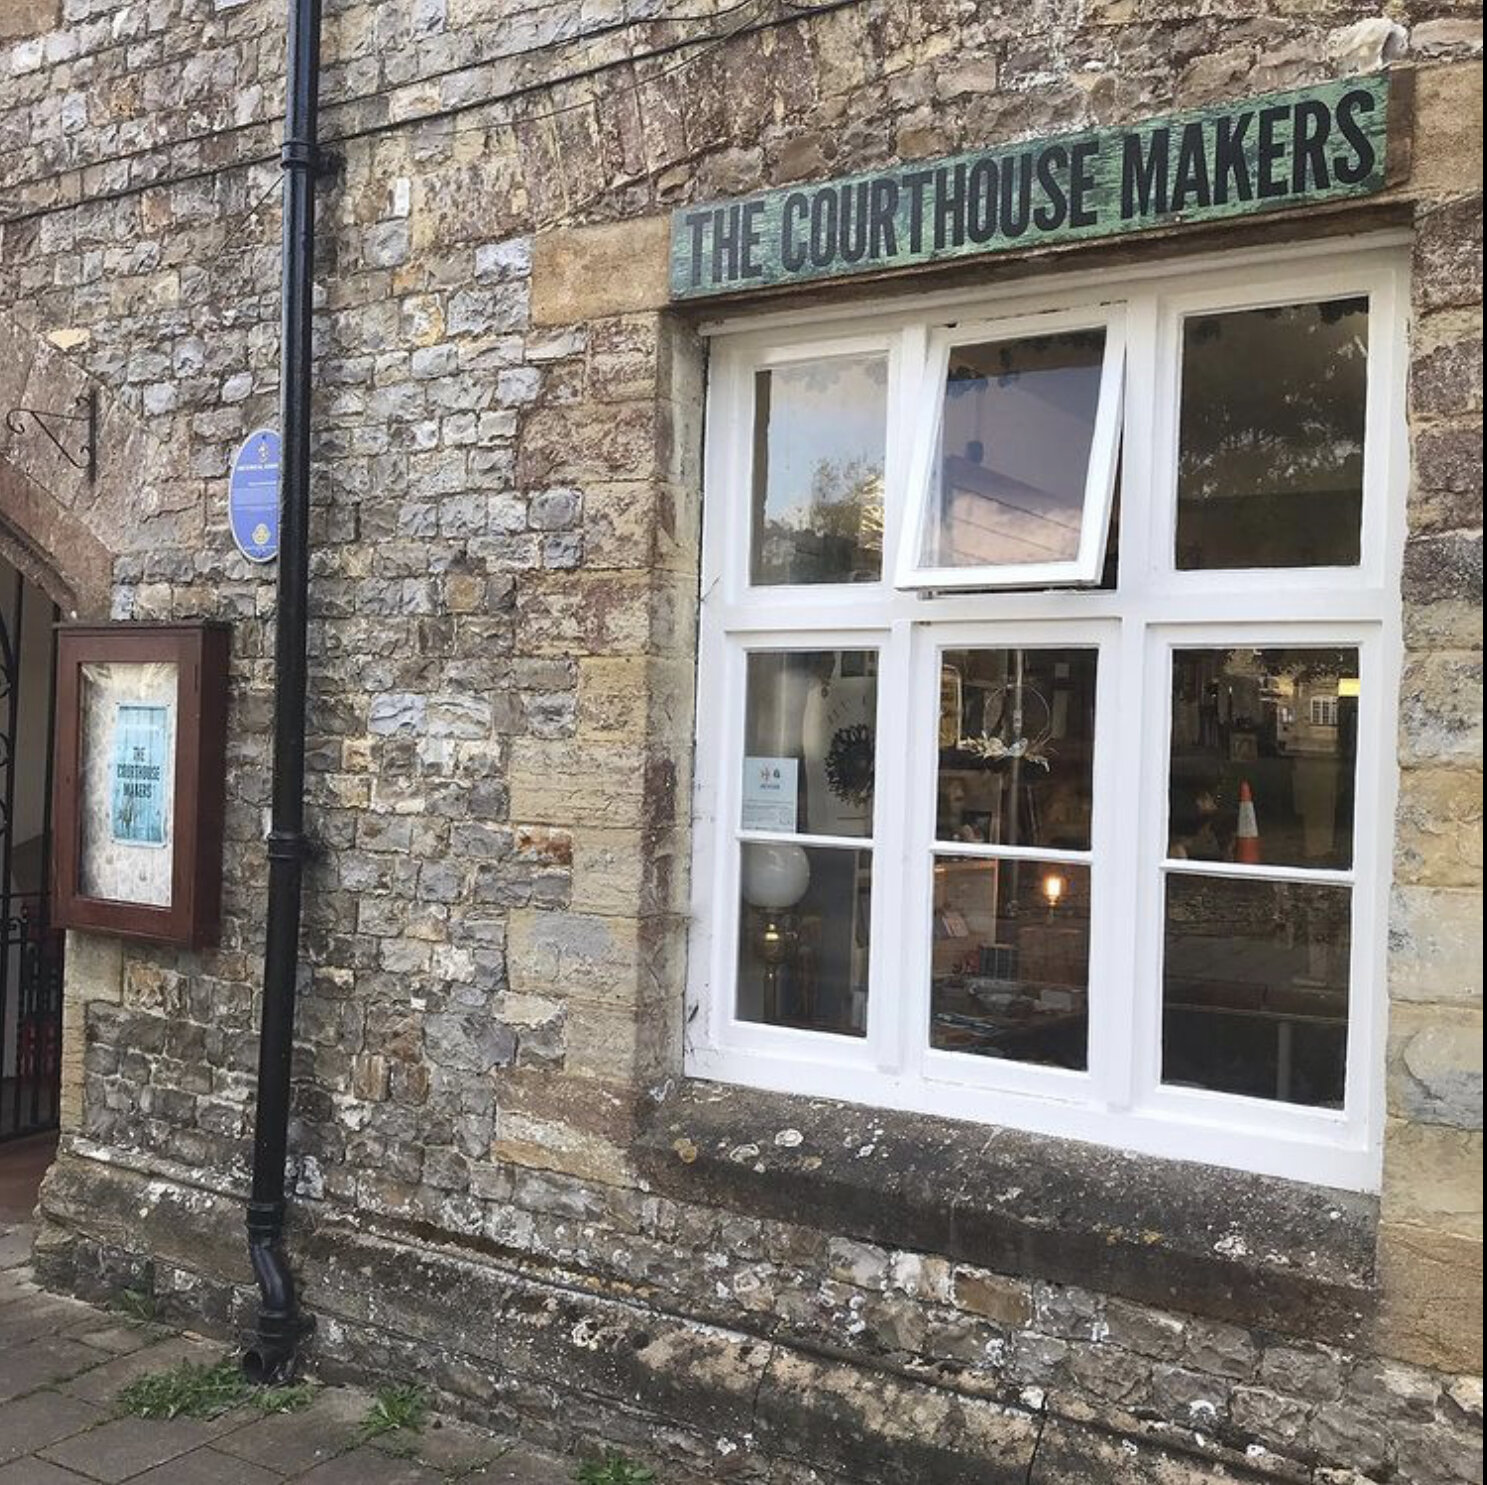 THE COURTHOUSE MAKERS - Axminster